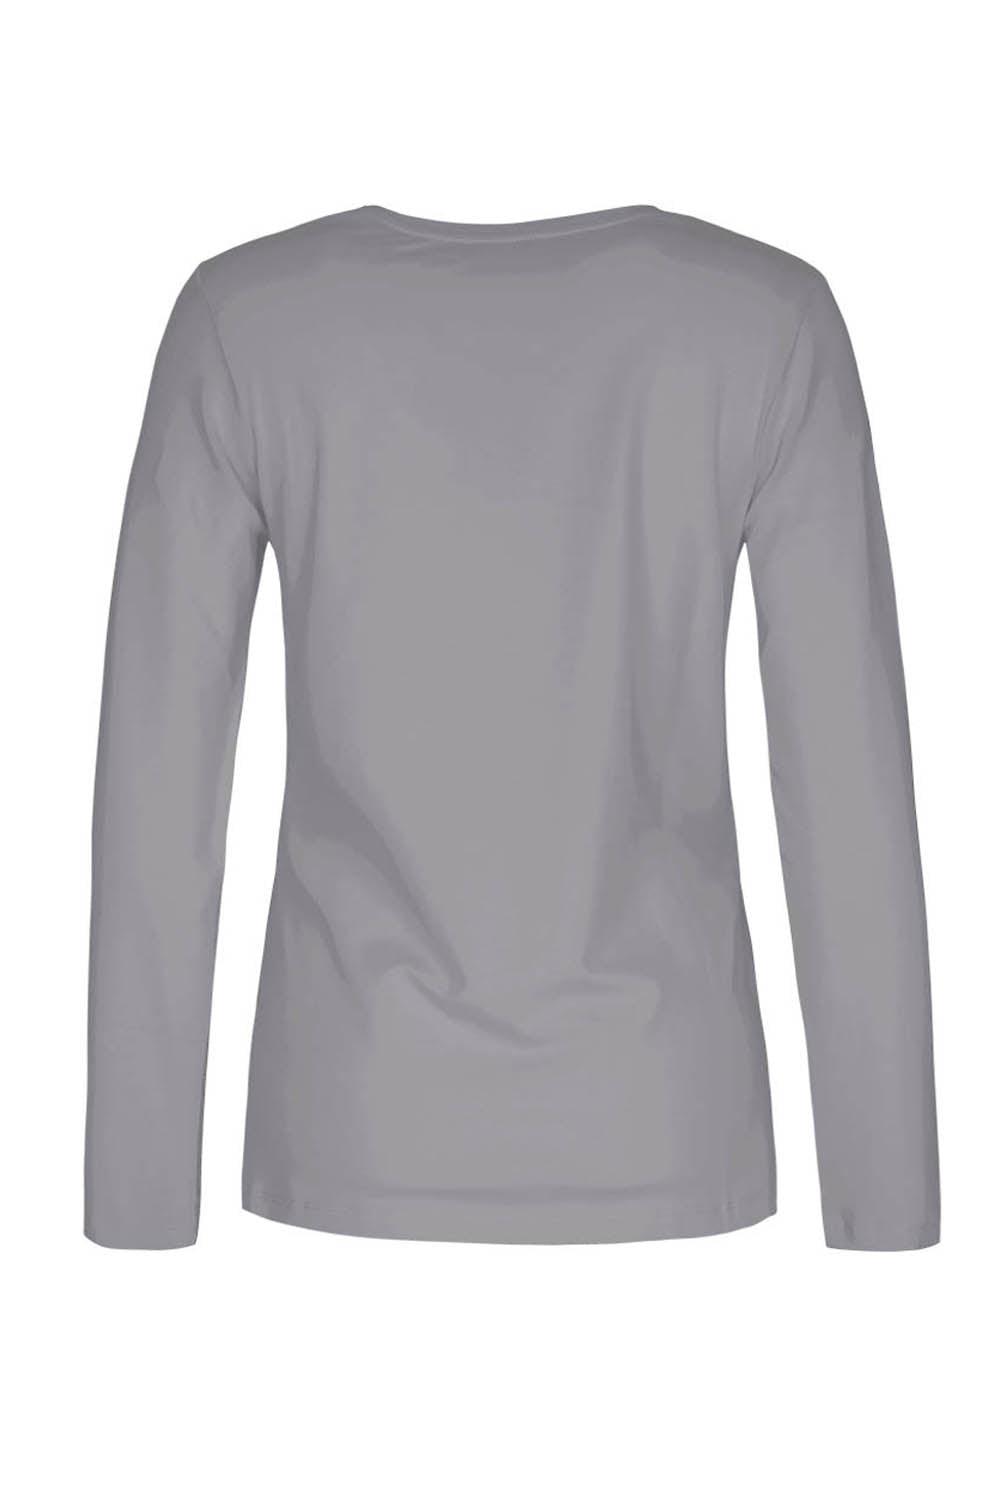 Dolcezza Top - Style 72500 - T-Shirt AW22, New, Pullover, Sale, Silver, Top ginasmartboutique